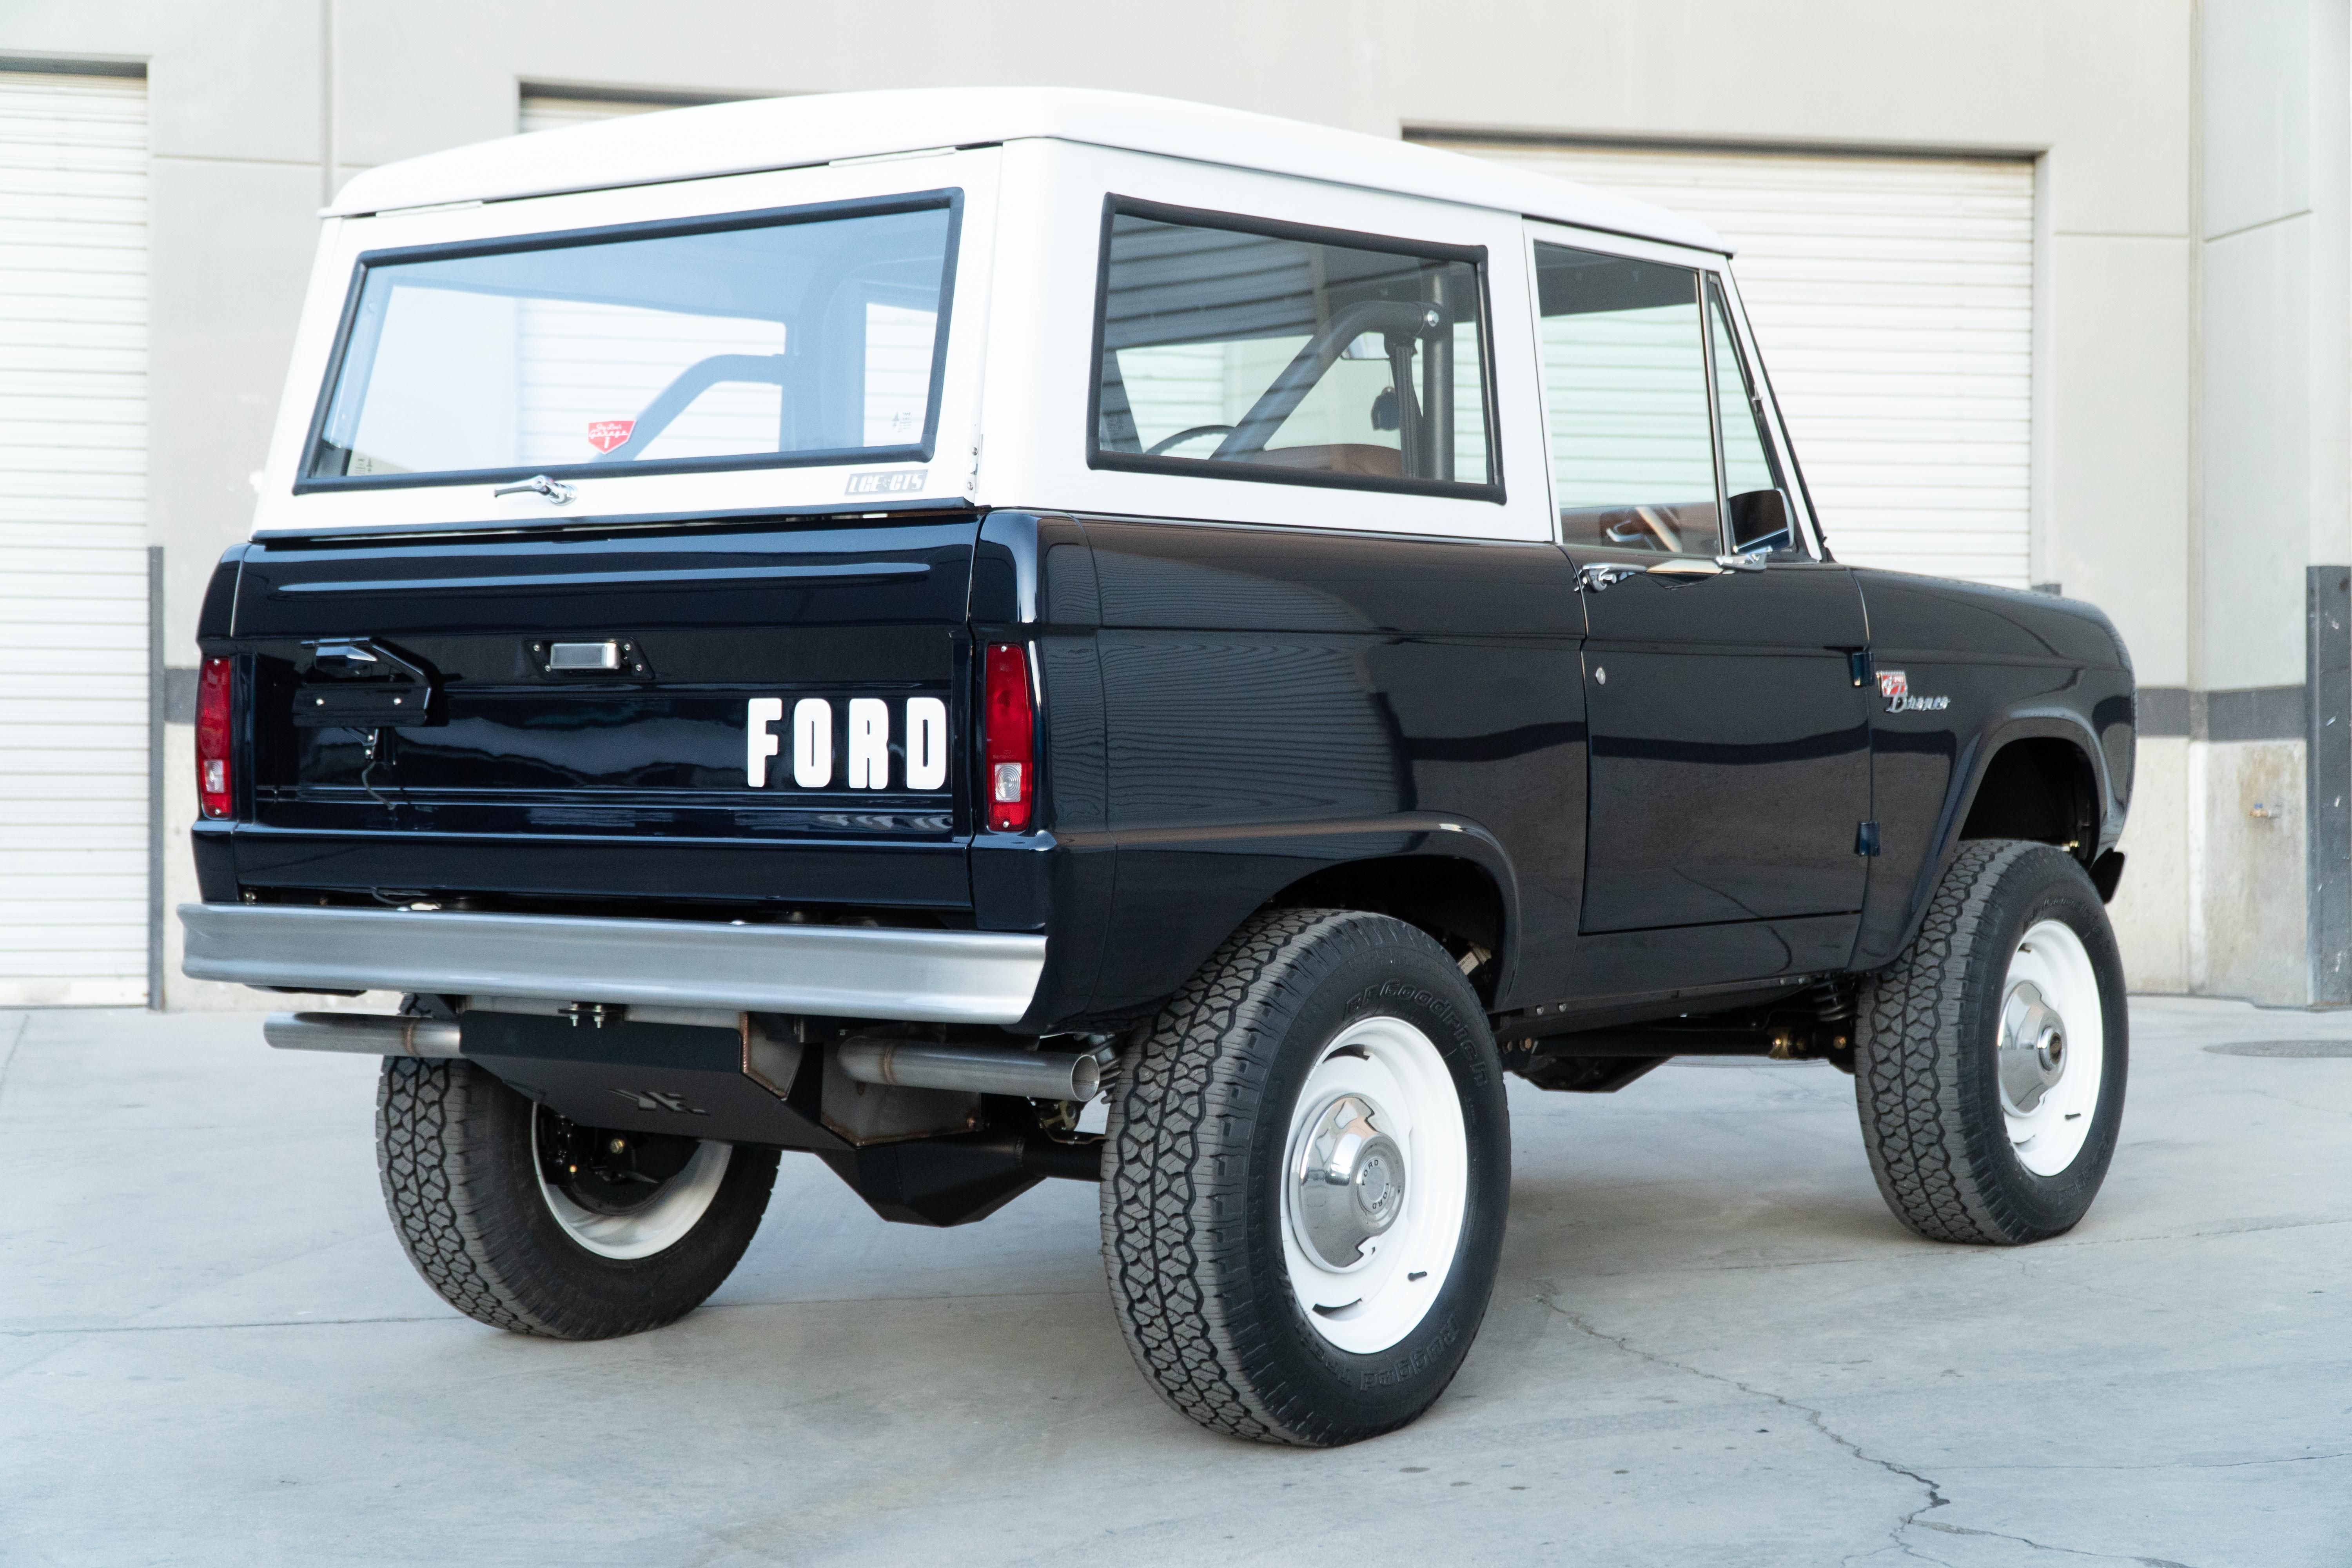 1968 Ford Bronco Wagon by Jay Leno, Ford Performance, LGE-CTS, and SEMA Garage